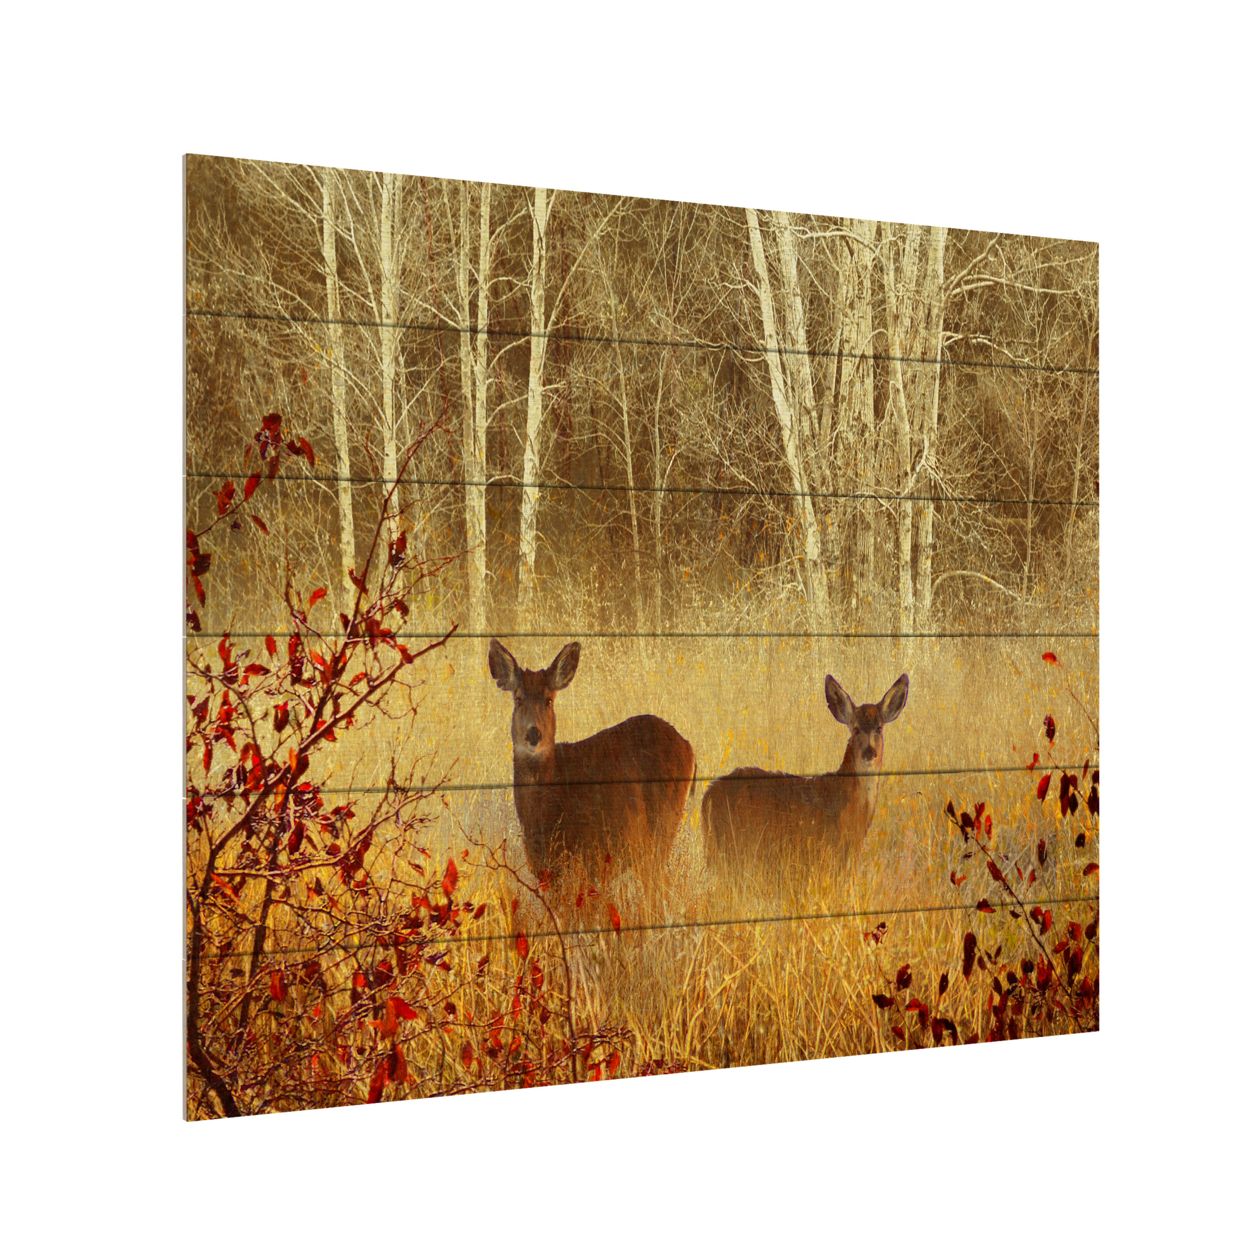 Wooden Slat Art 18 X 22 Inches Titled Foggy Deer Ready To Hang Home Decor Picture